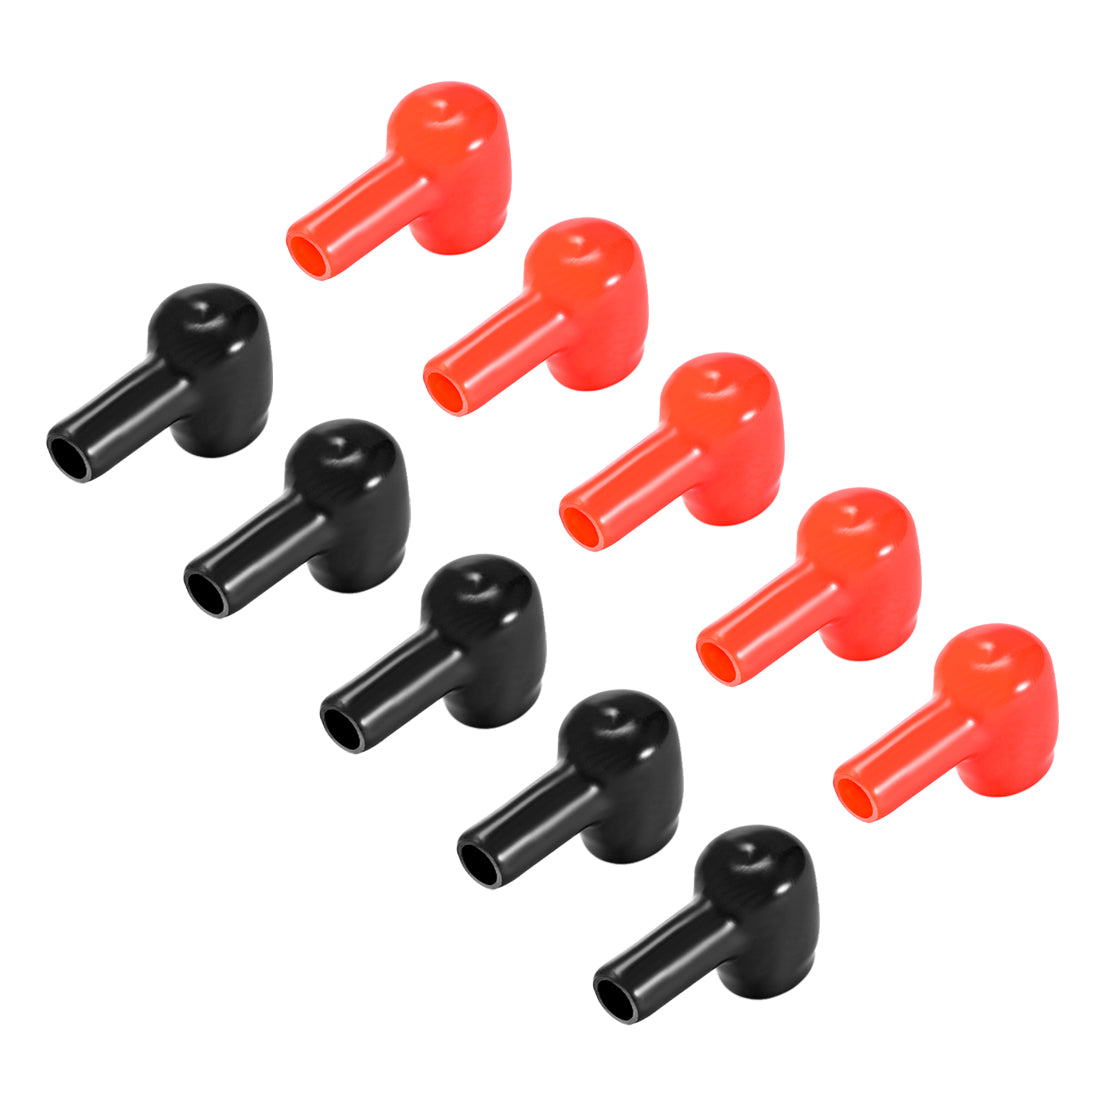 uxcell Uxcell Battery Terminal Insulating Rubber Protector Covers for 10mm Terminal 6mm Cable Red Black 5 Pairs